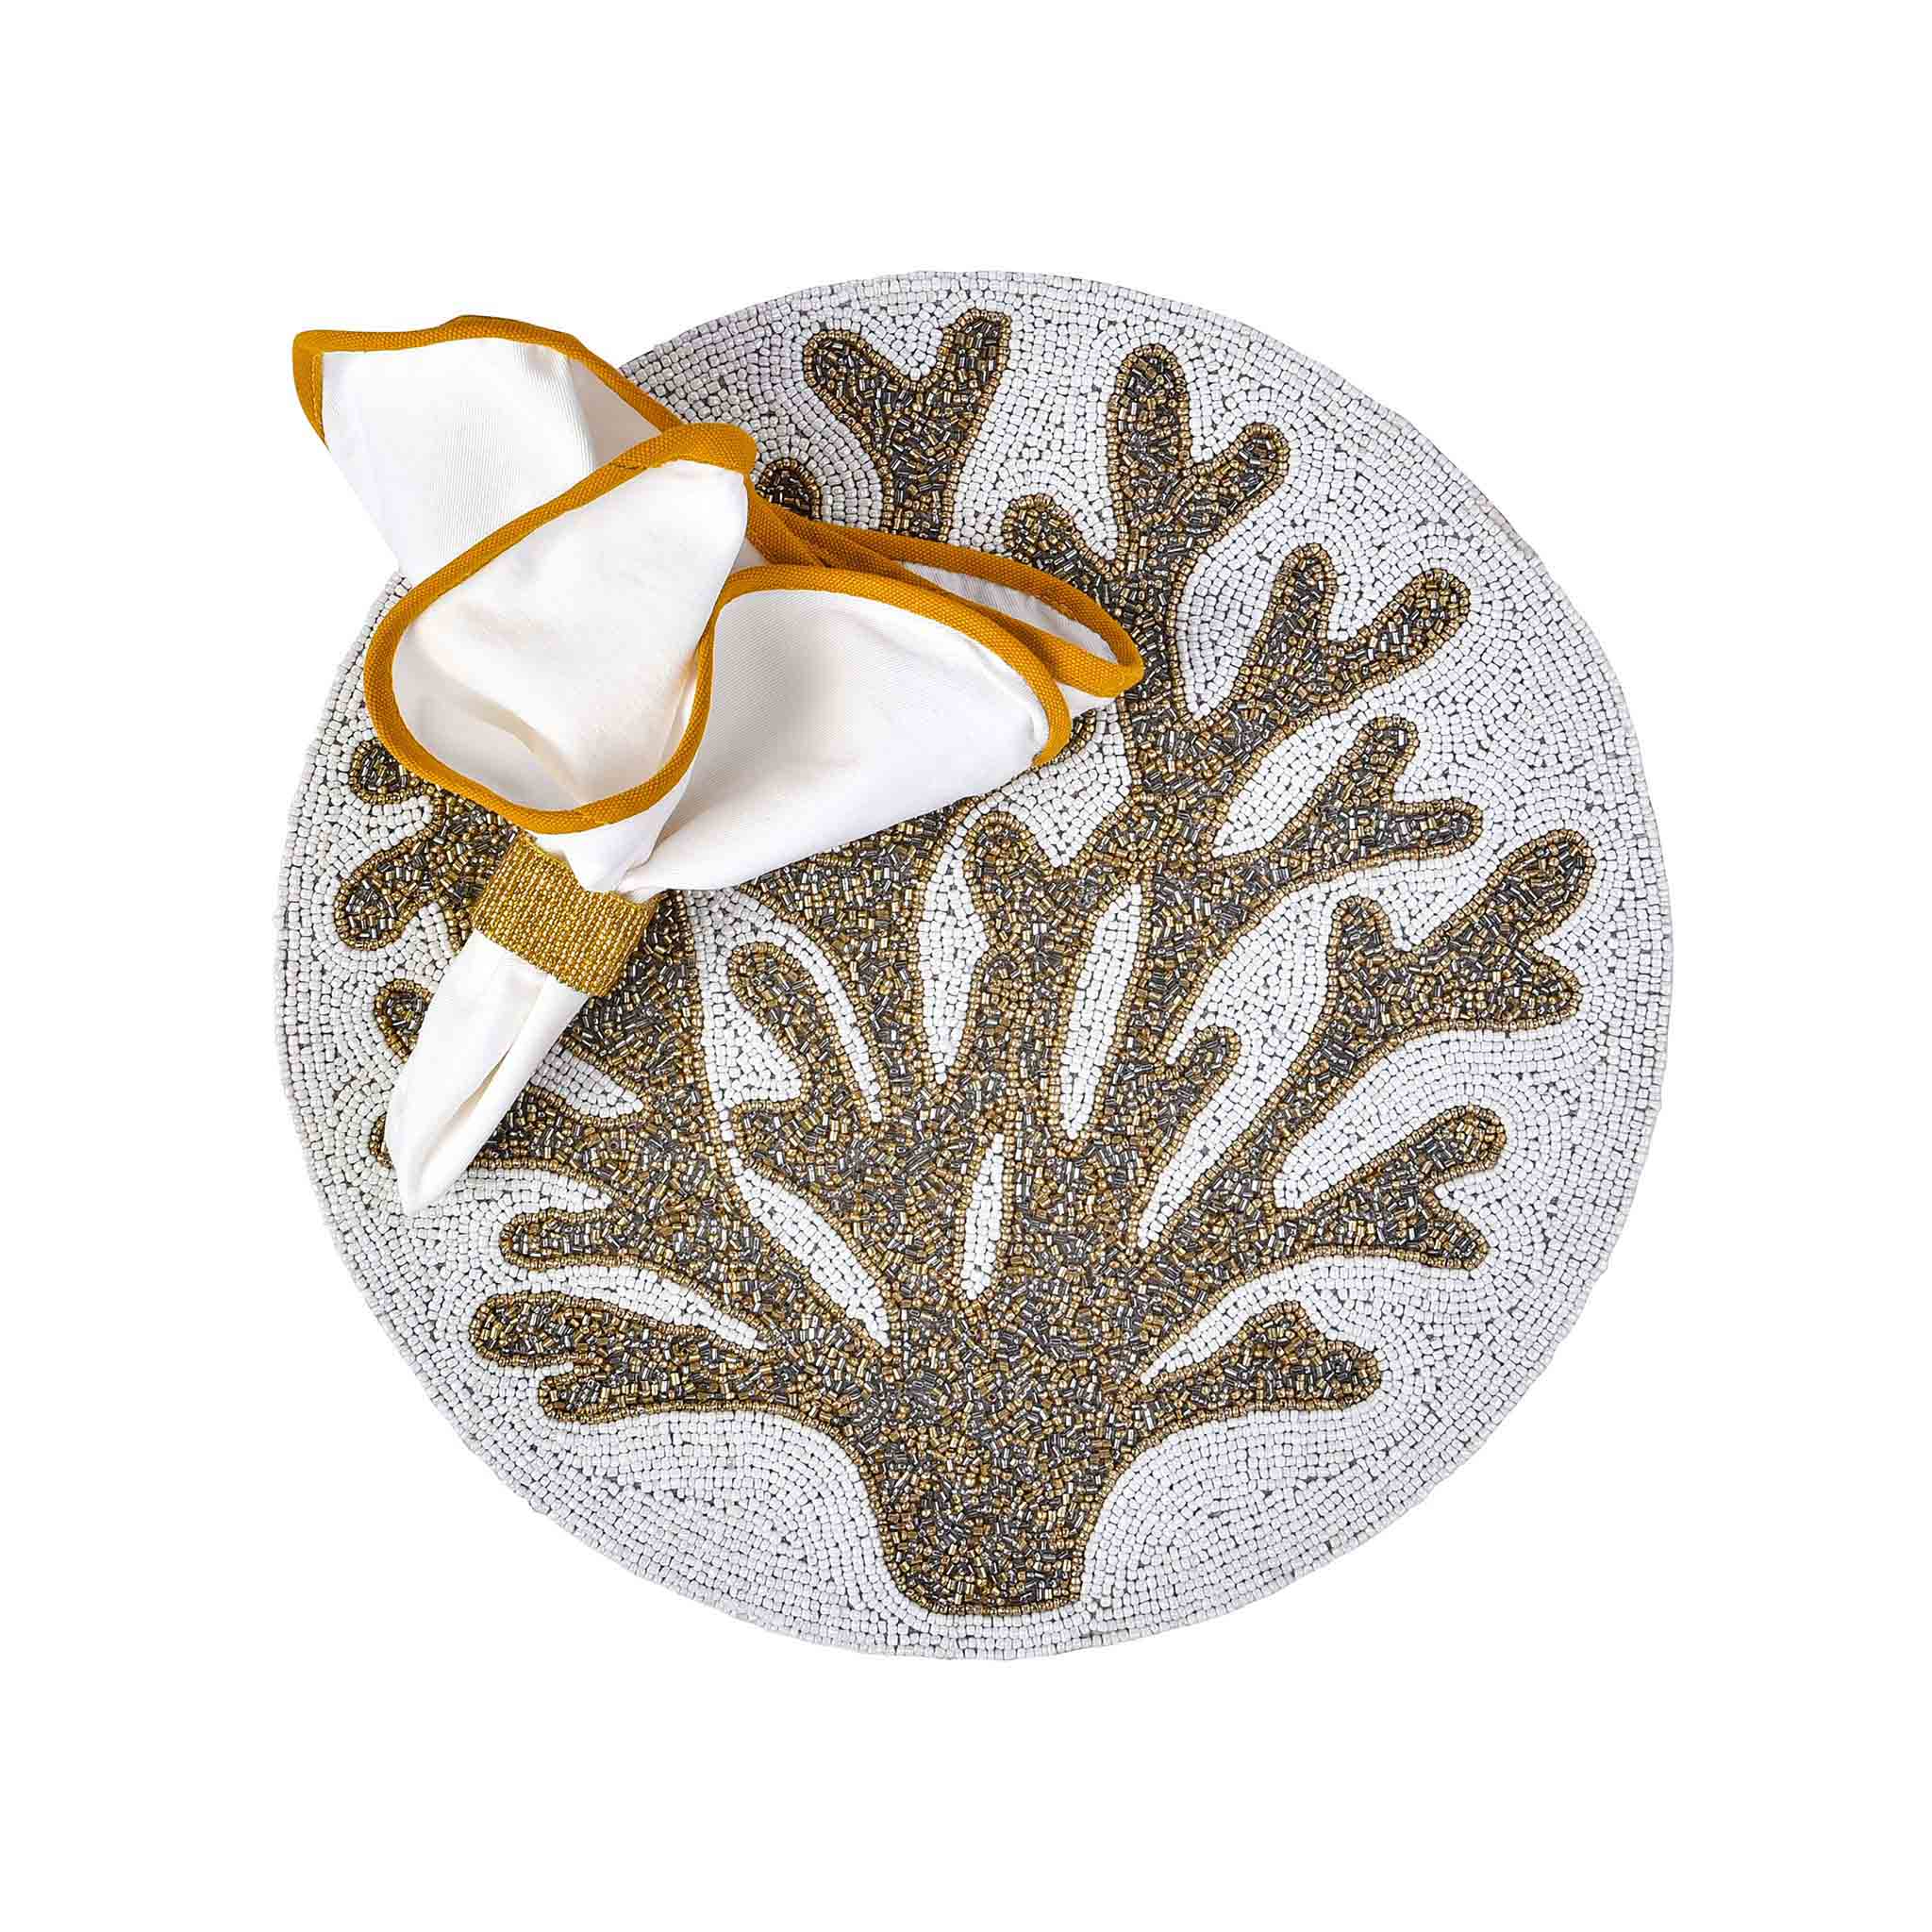 Sea La Vie Table Setting for 4 - Embroidered Placemats, Napkin Rings & Table Runner in Cream & Gold